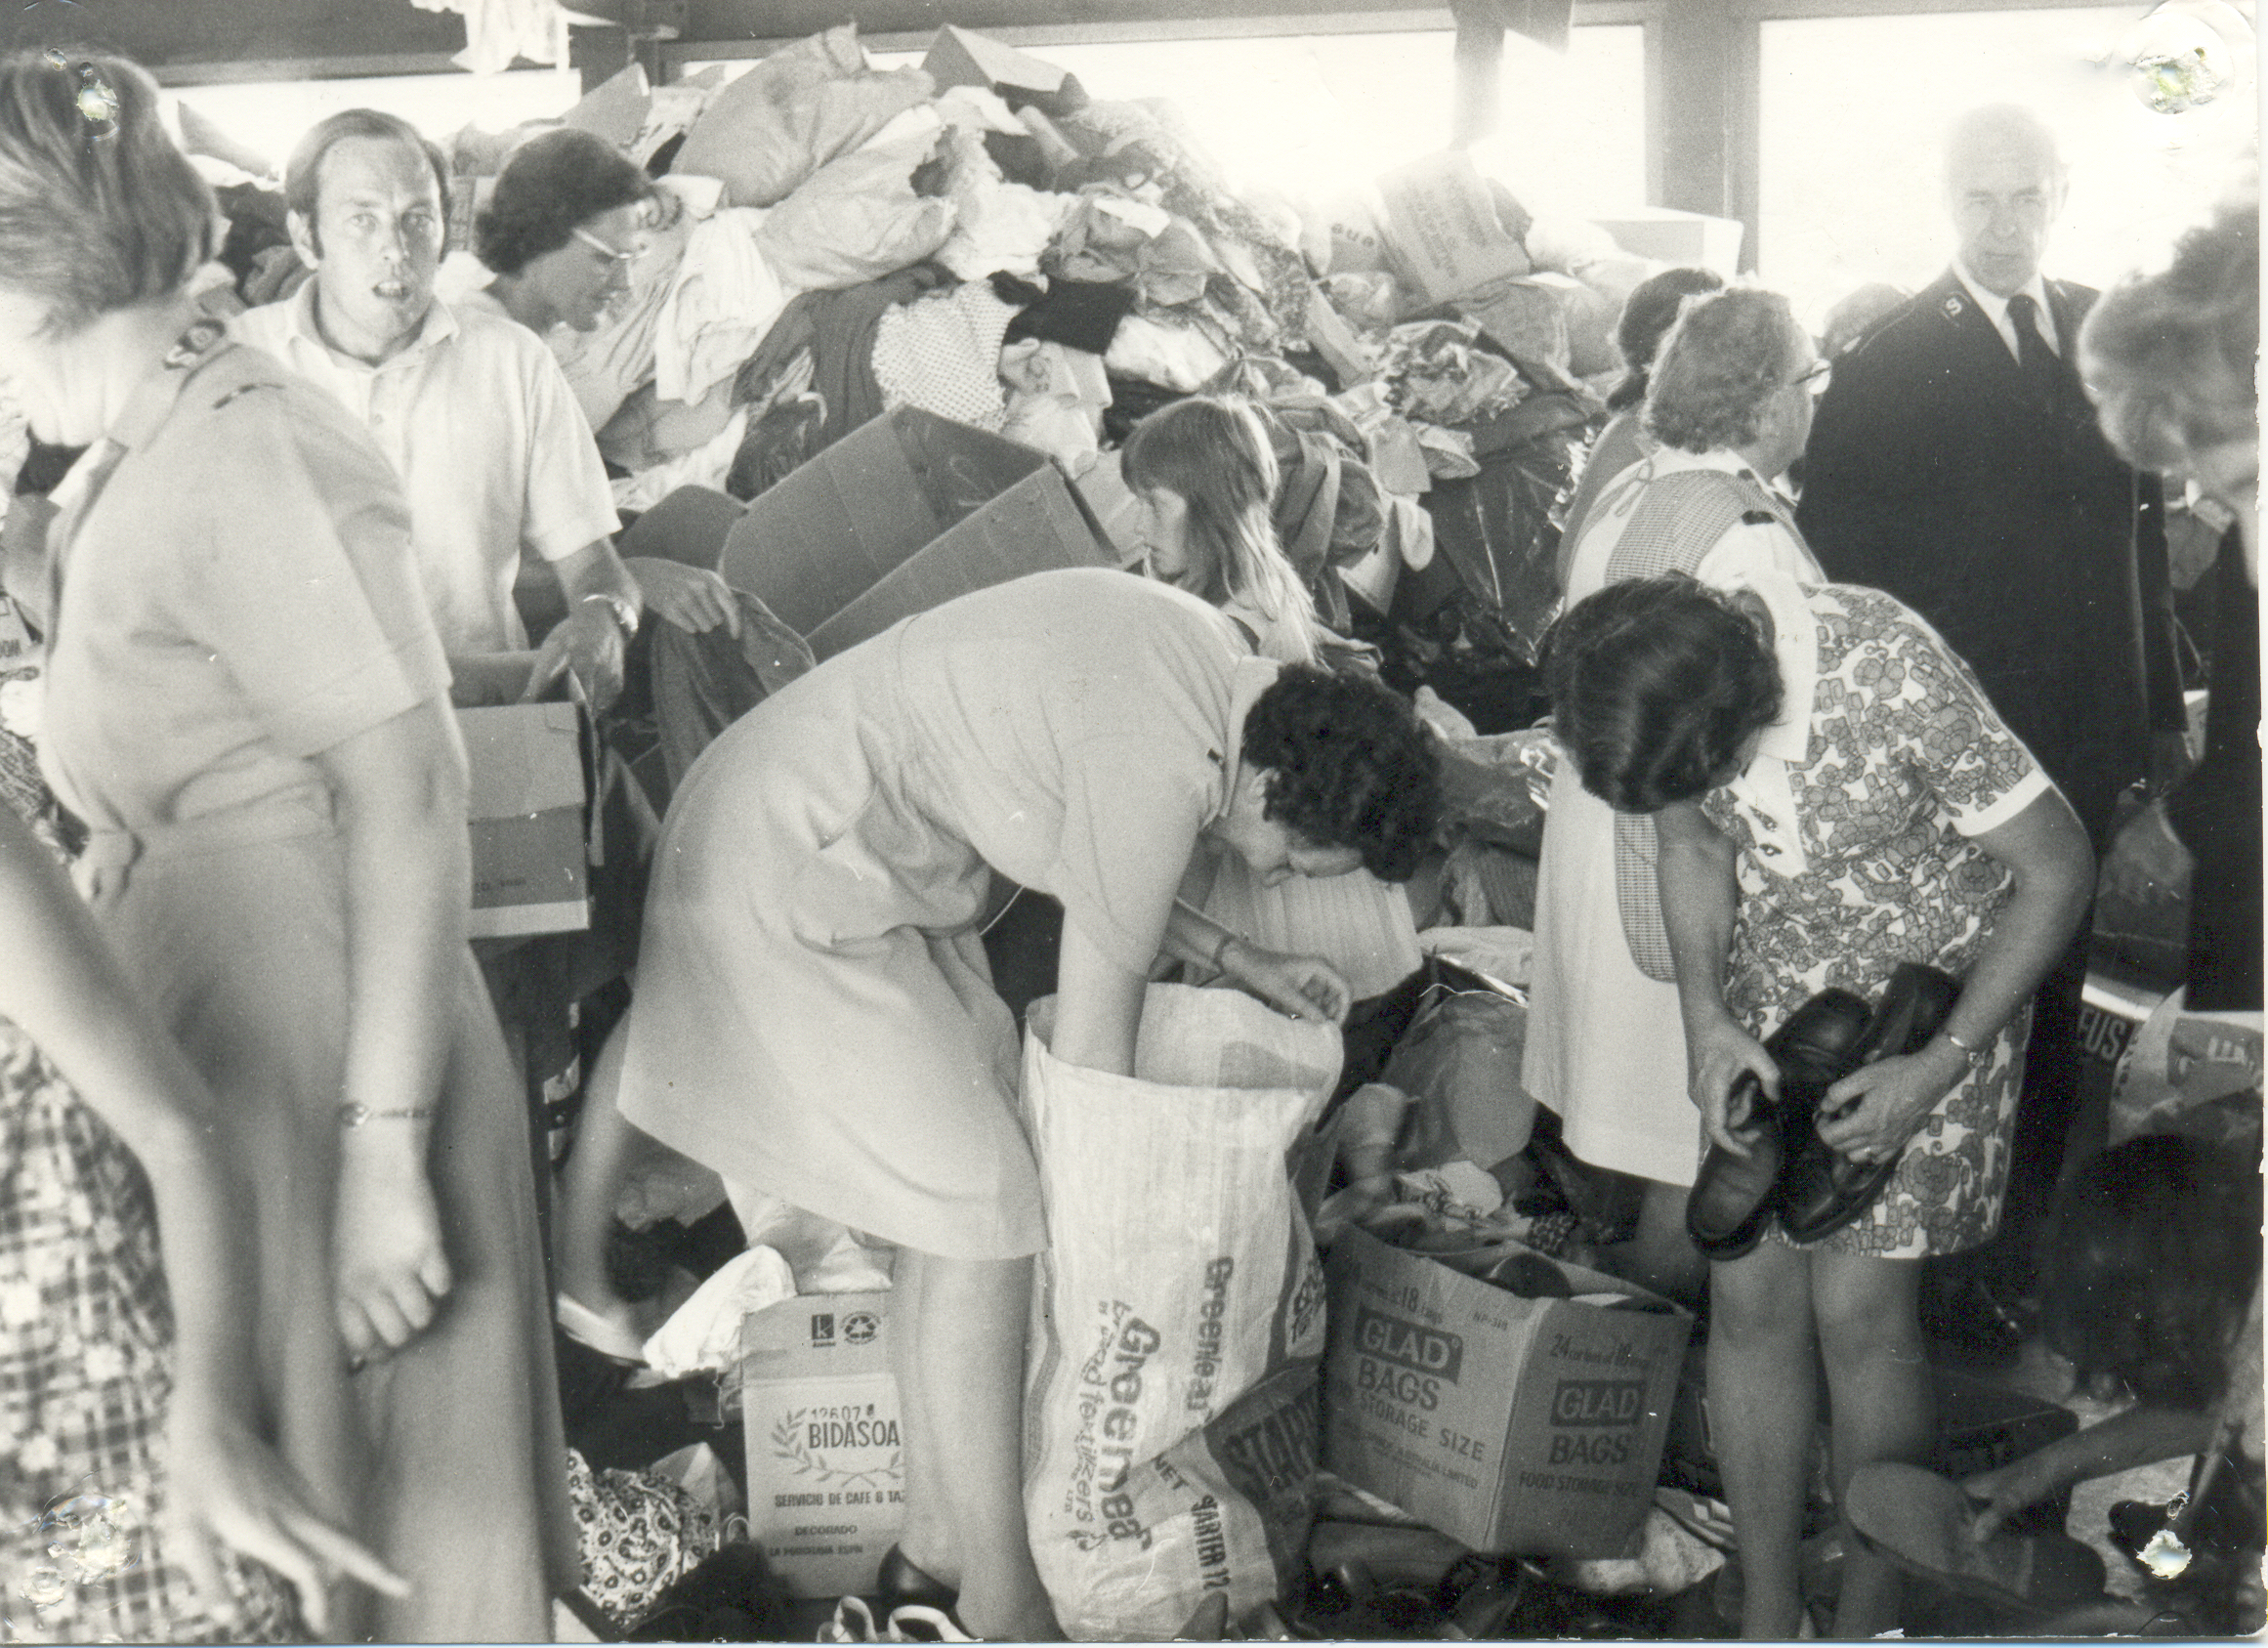 Old images of Salvos distributing essentials